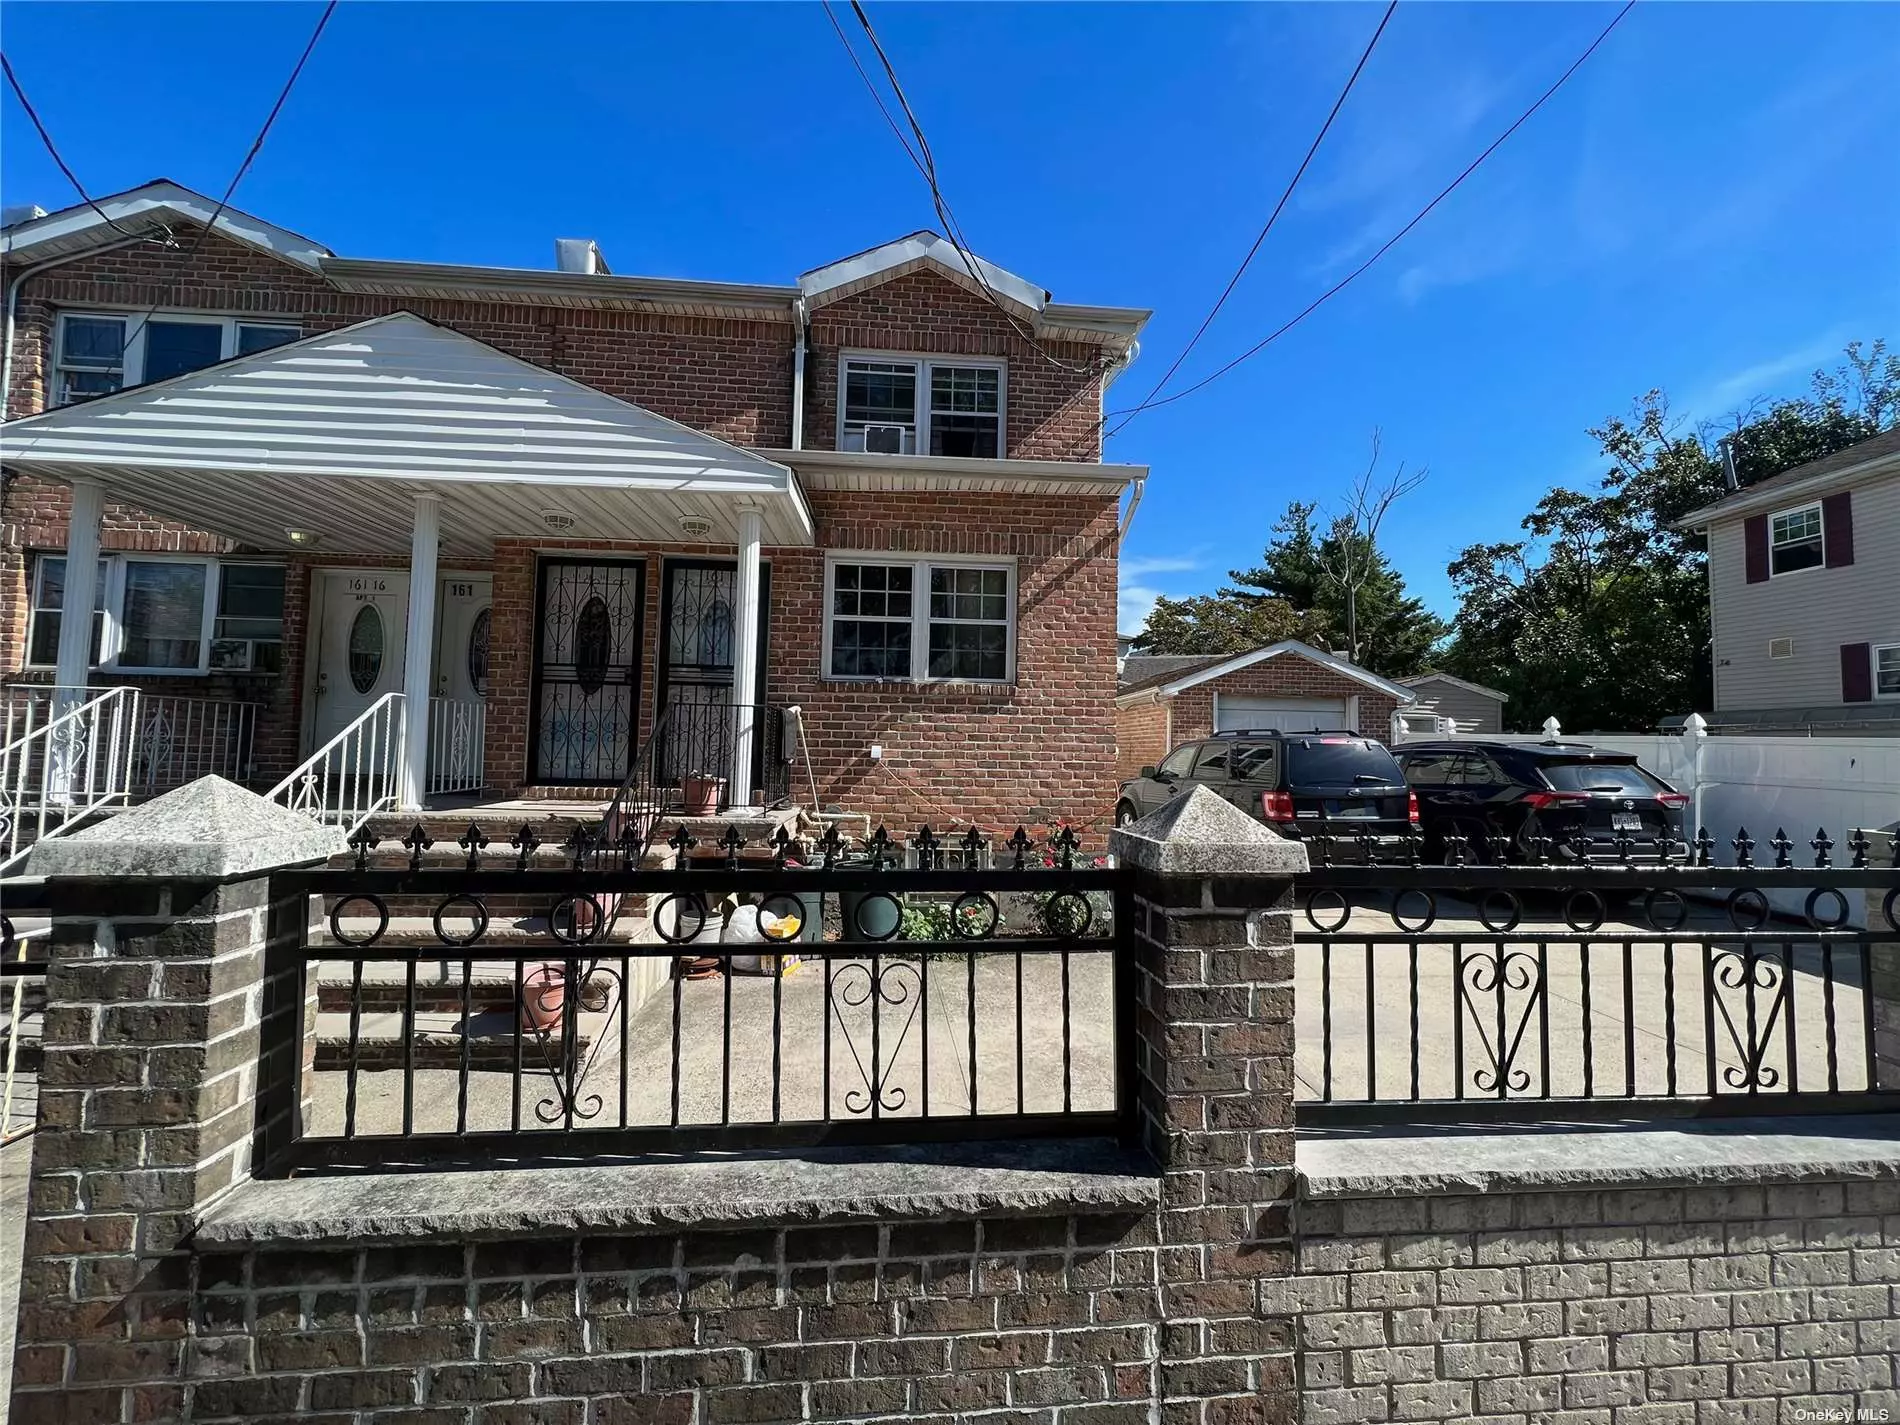 Excellent opportunity, semidetached two family, private driveway. Convenient located close to shopping, schools, transportation etc... price to sell.